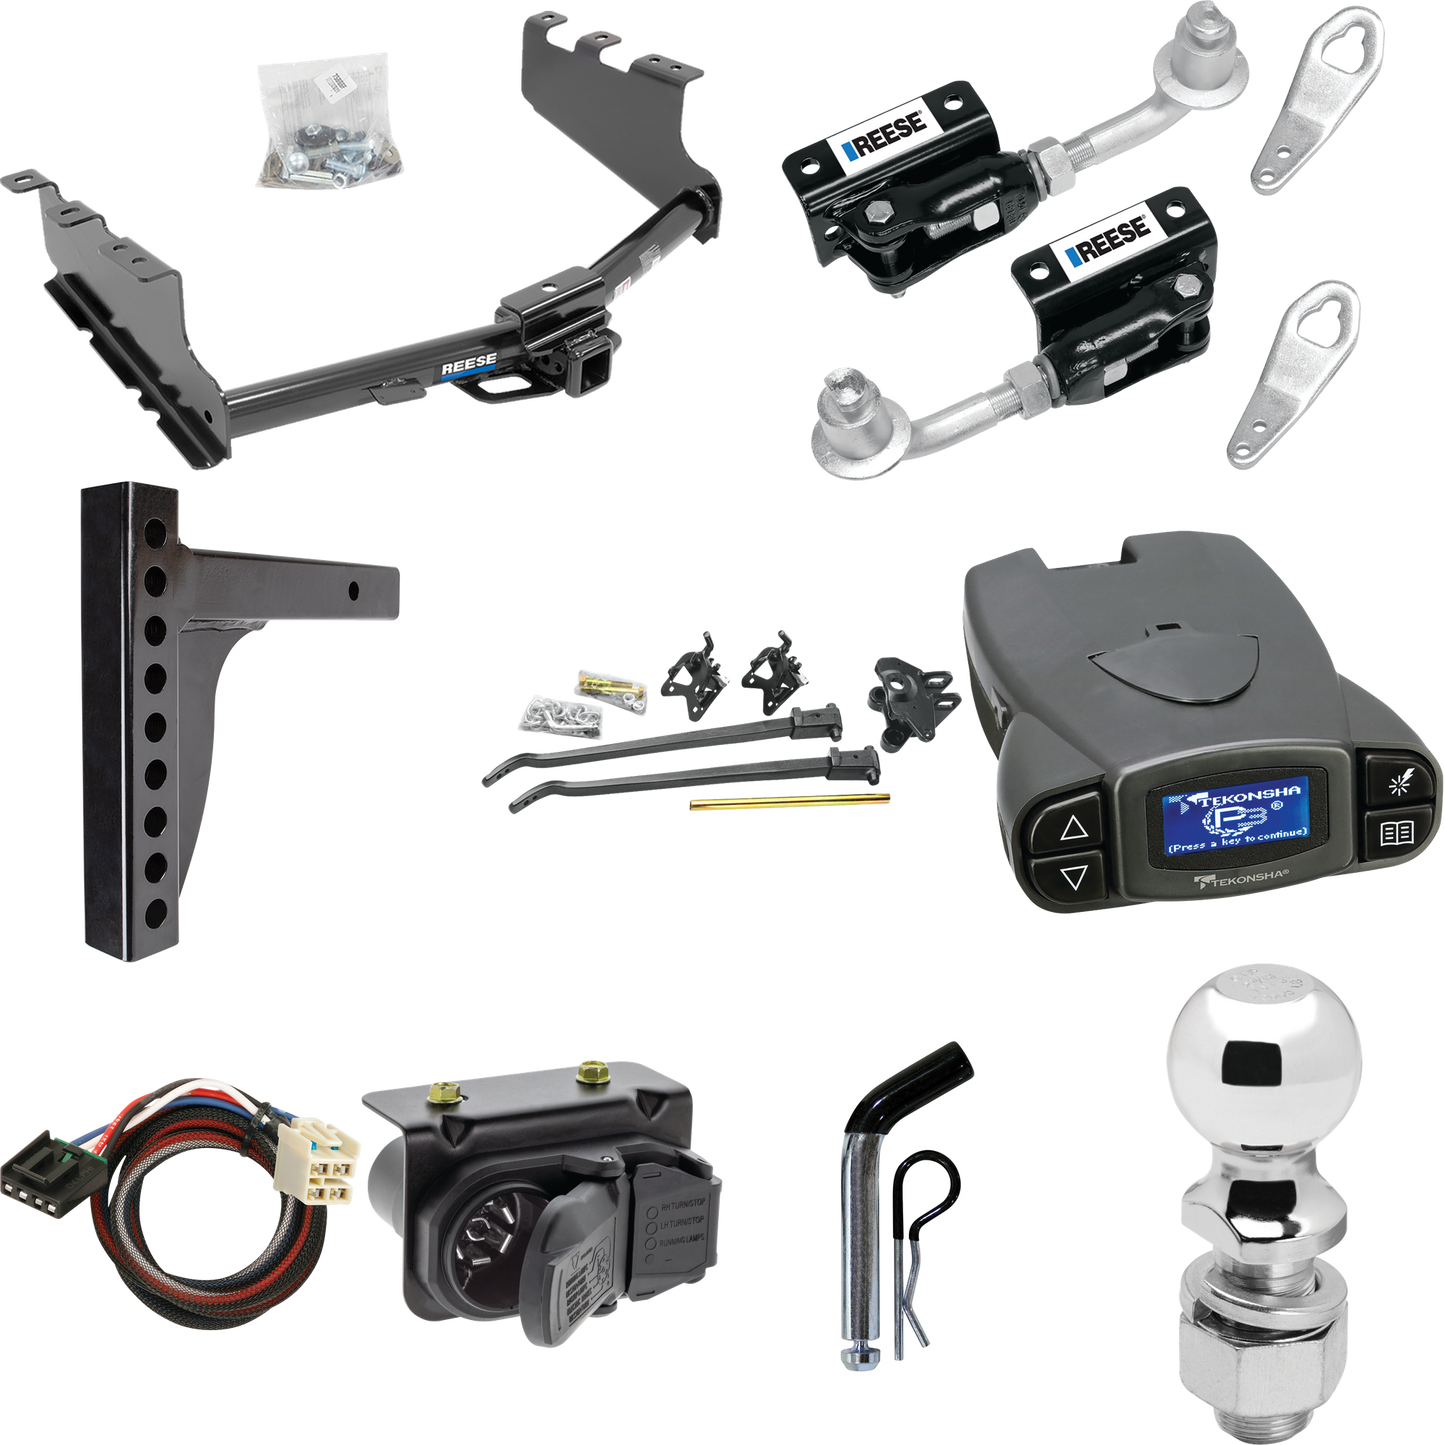 Fits 2019-2019 GMC Sierra 1500 LD (Old Body) Trailer Hitch Tow PKG w/ 12K Trunnion Bar Weight Distribution Hitch + Pin/Clip + Dual Cam Sway Control + 2-5/16" Ball + Tekonsha Prodigy P3 Brake Control + Plug & Play BC Adapter + 7-Way RV Wiring By Reese